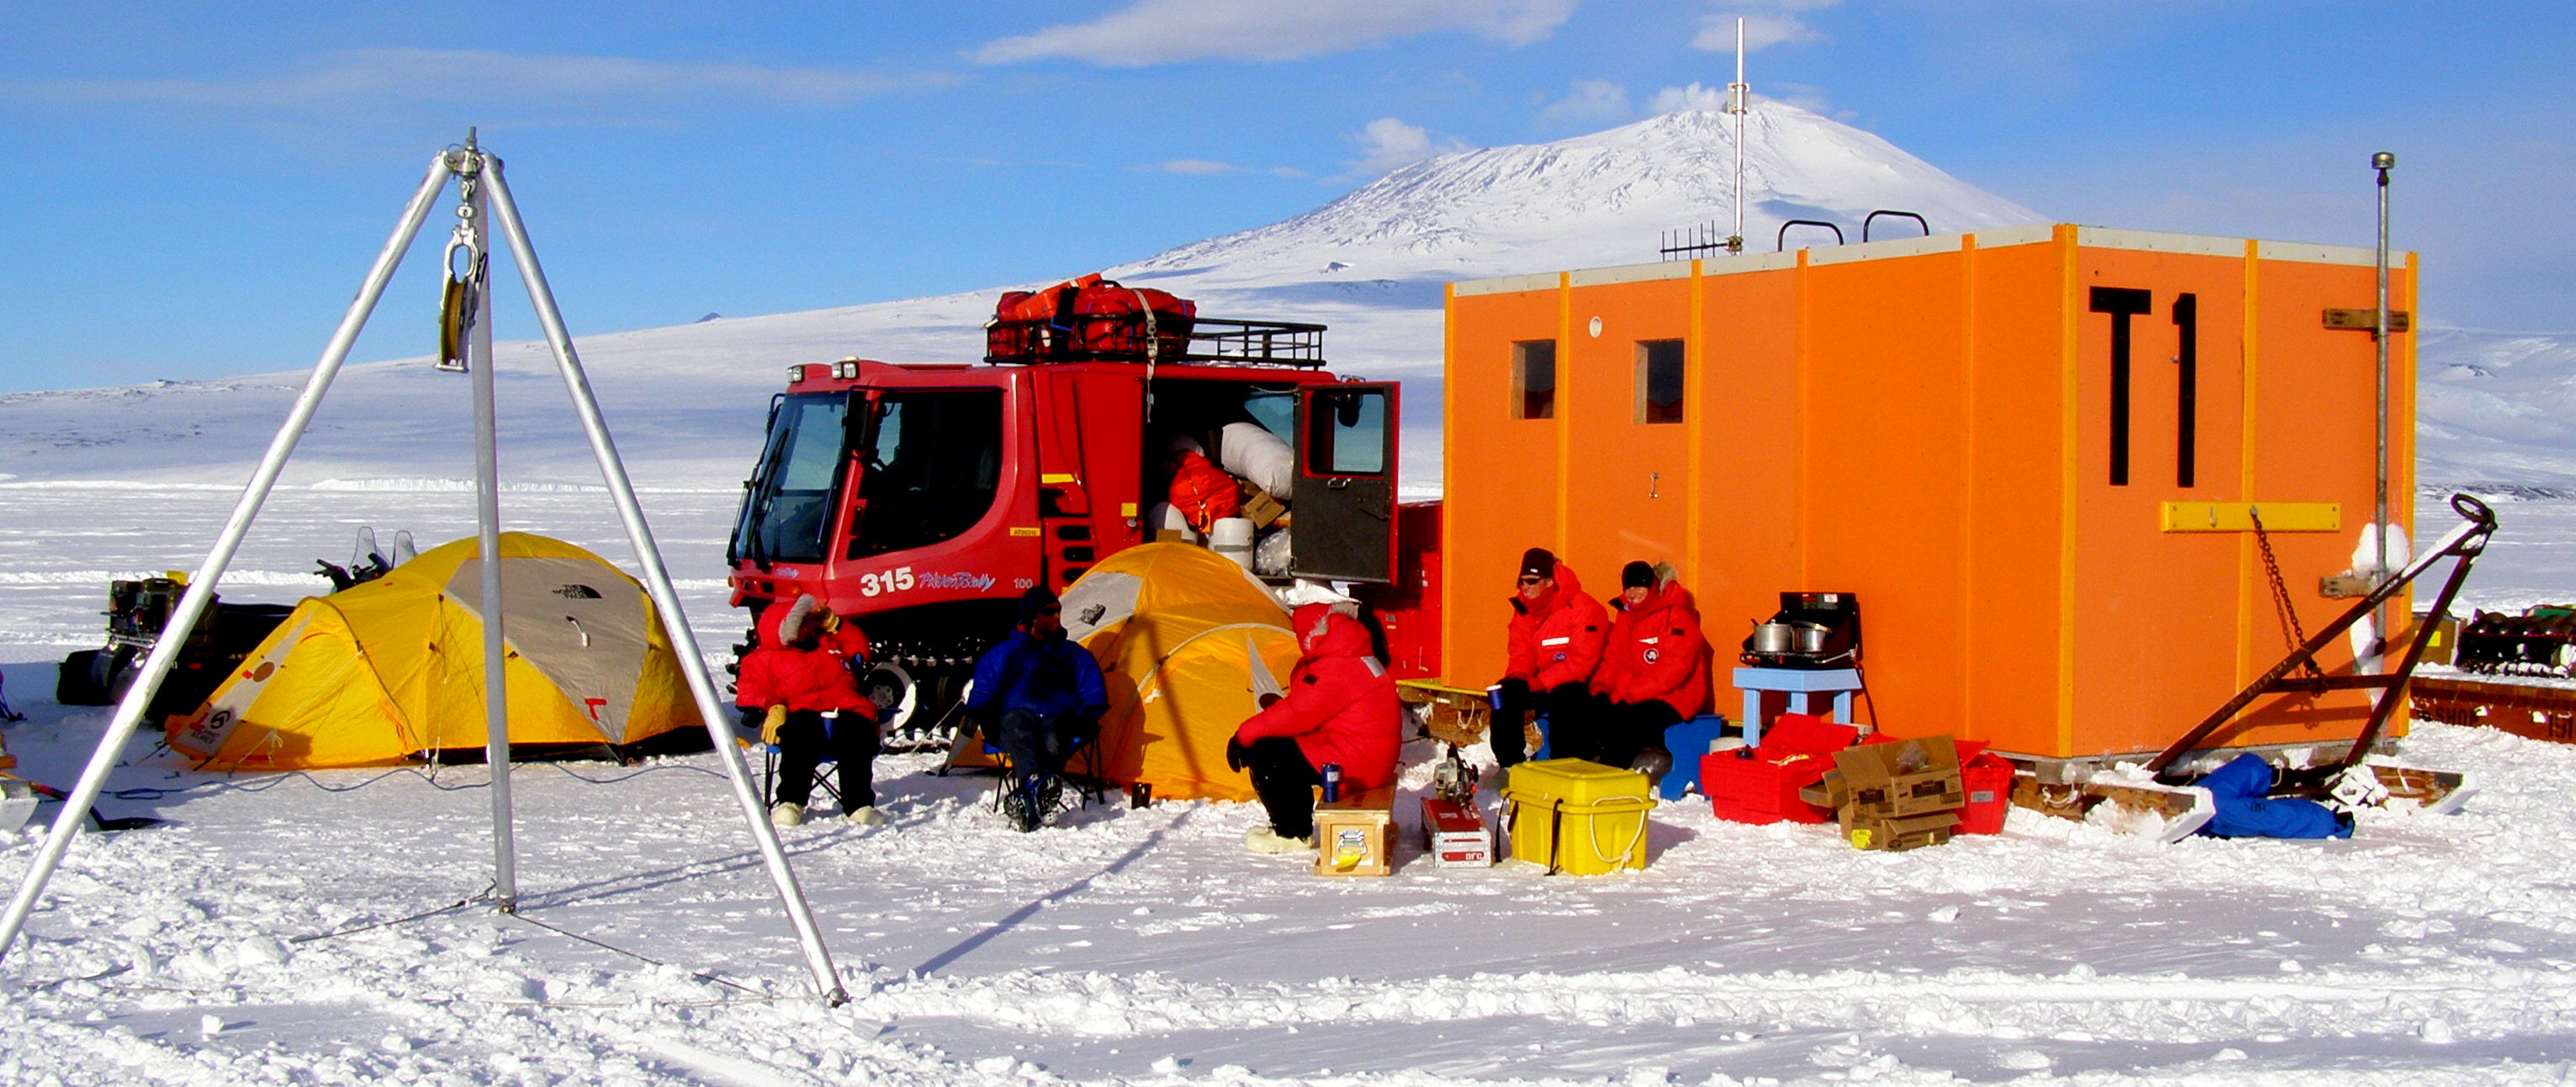 Enjoying some hot beverages out of the wind at Station II ice camp